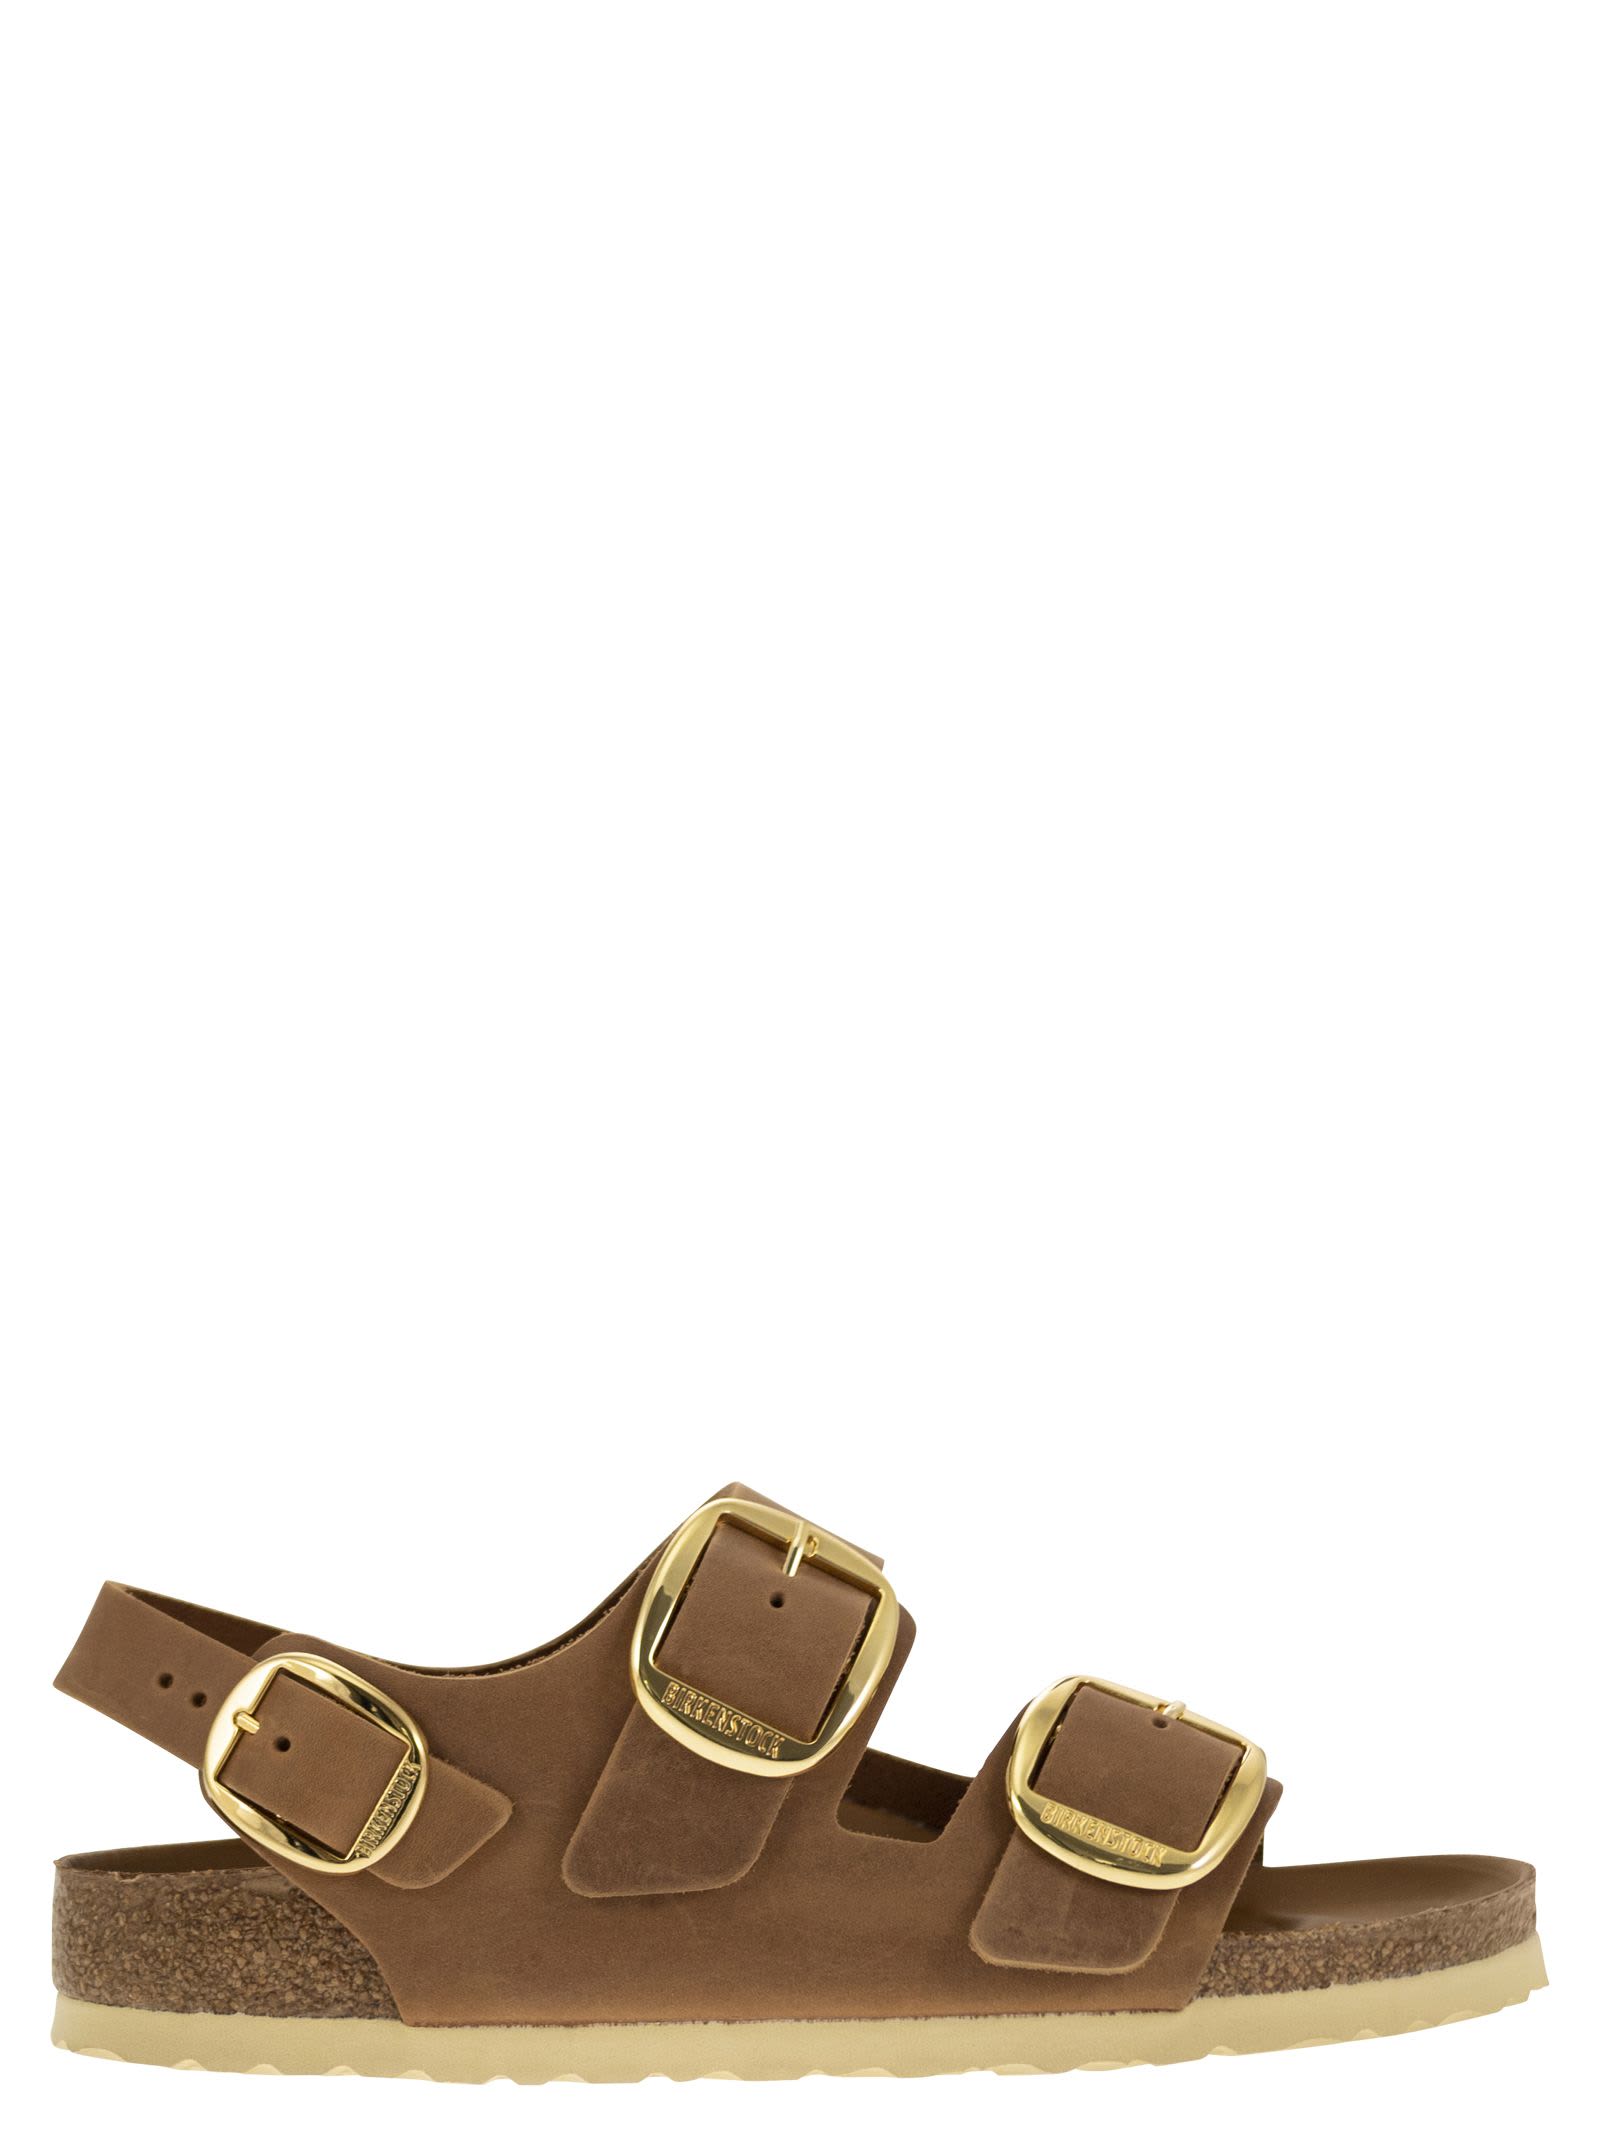 Milano Big Buckle - Oiled Leather Sandal